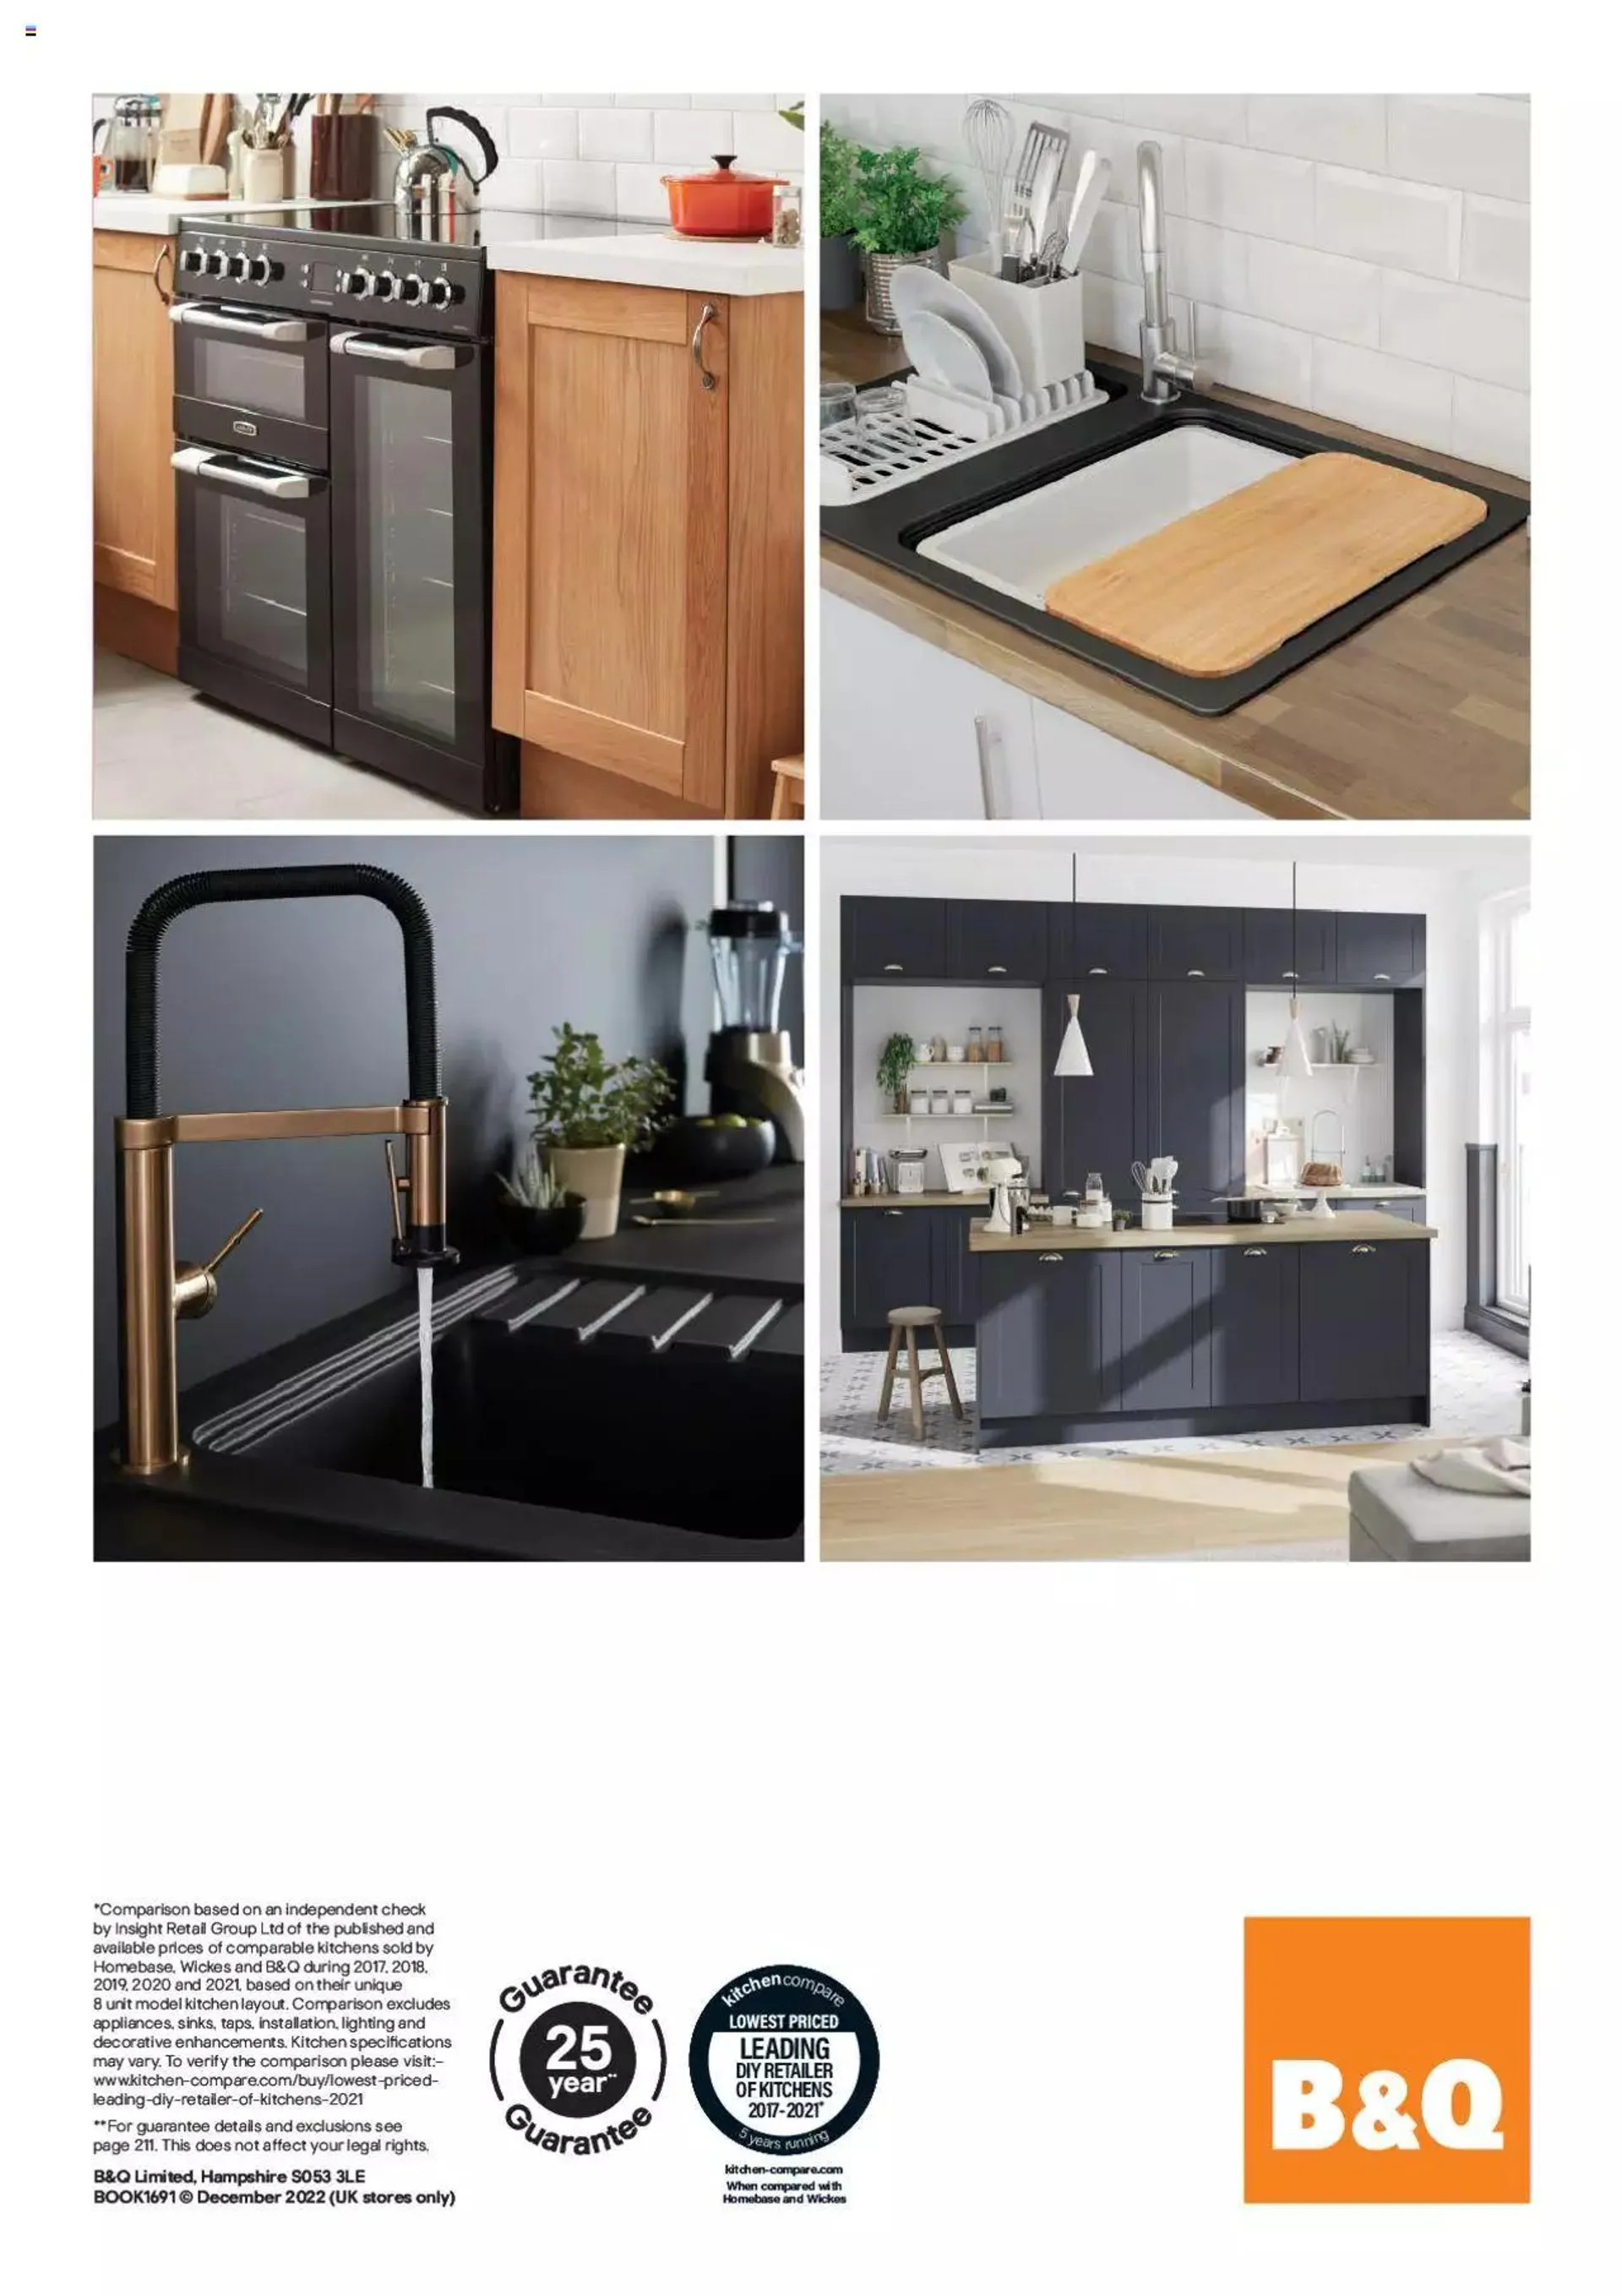 B&Q - Kitchens product & cabinetry guide - 211